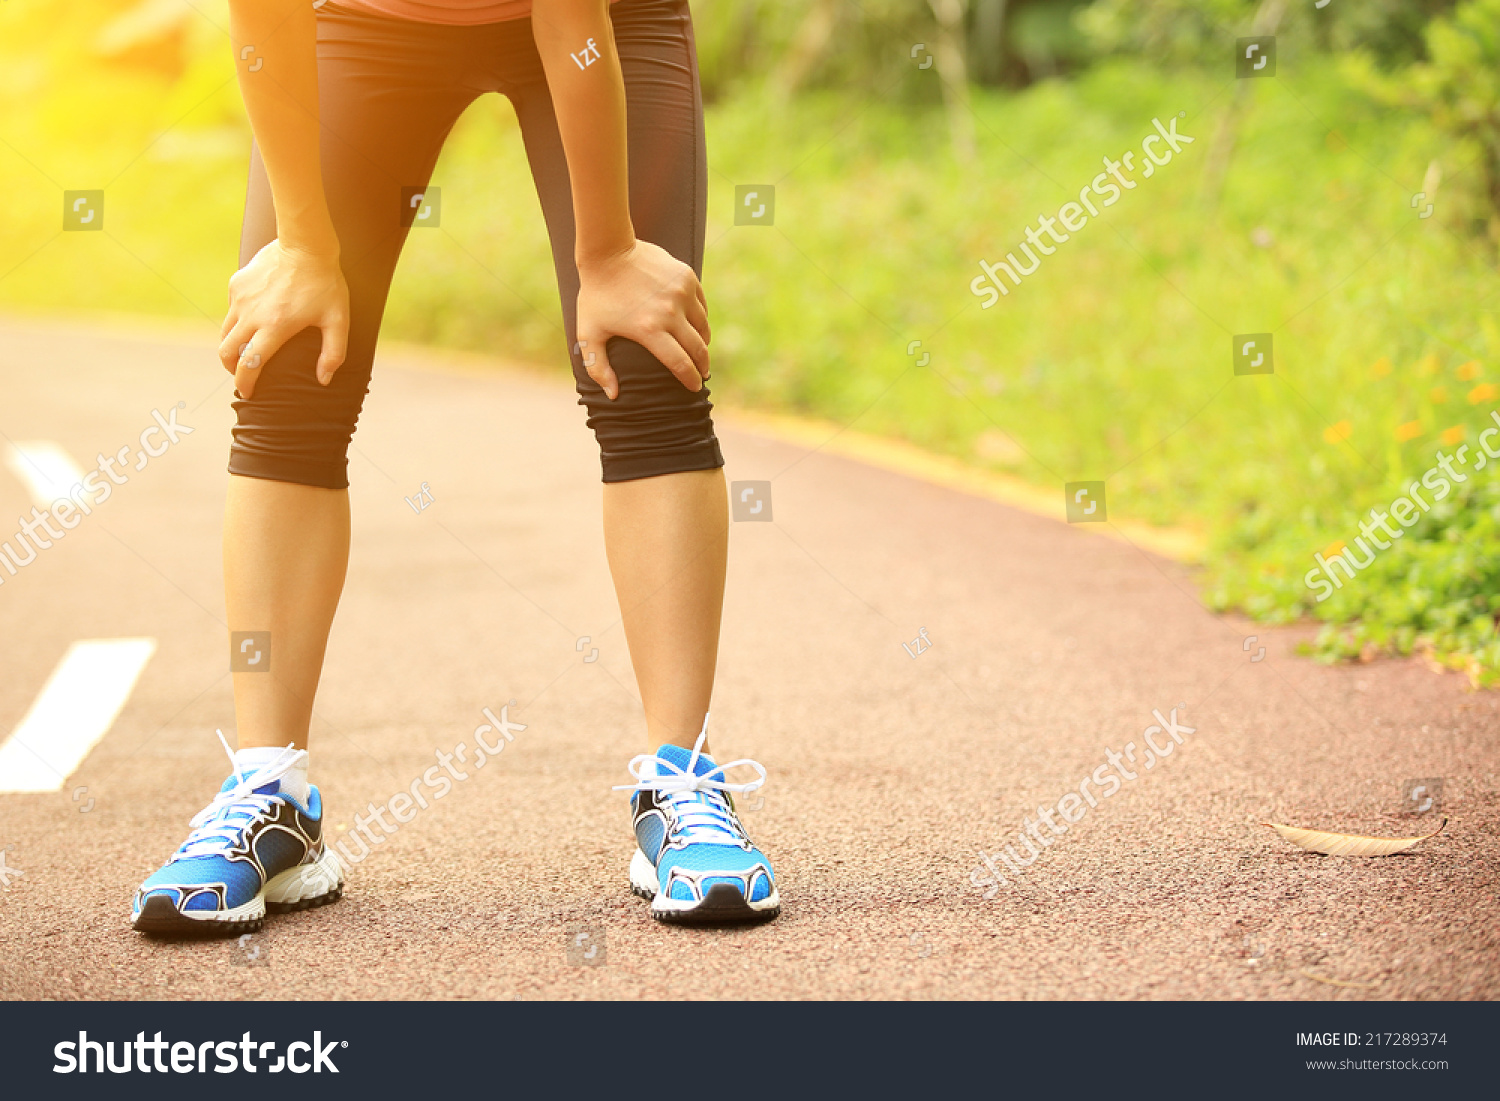 Tired Woman Runner Taking A Rest After Running Hard In Countryside Road